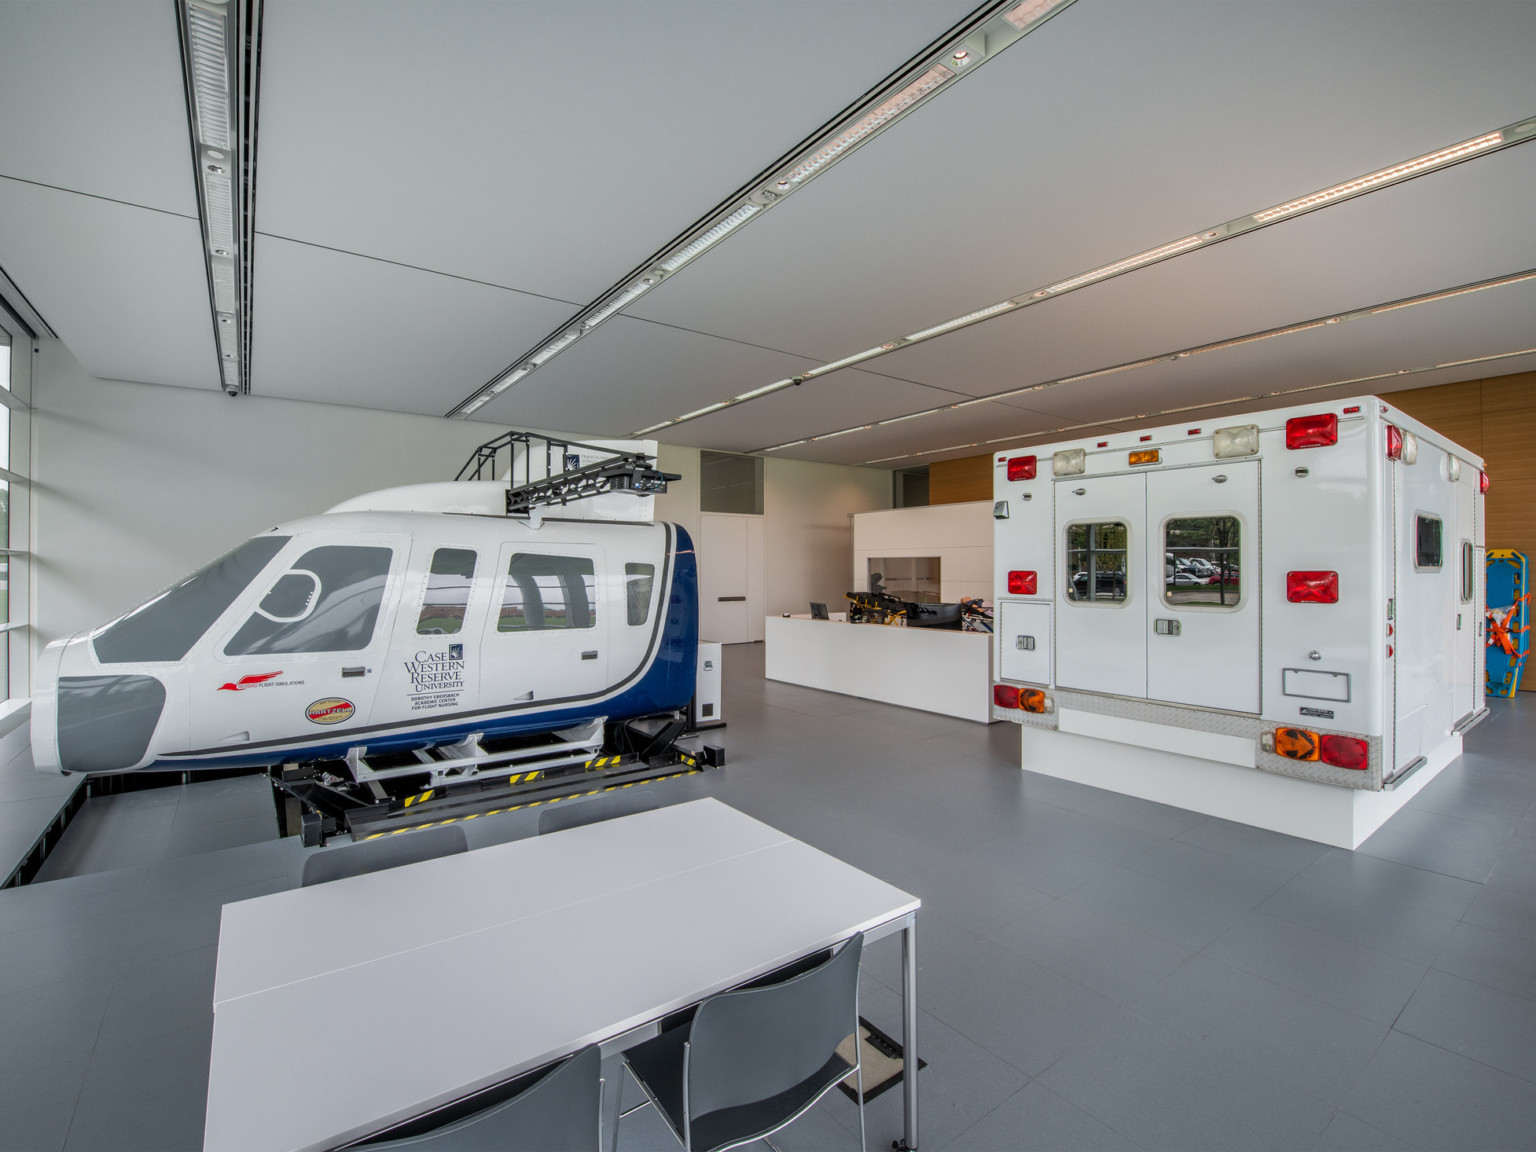 White room with grey floor. Cockpit and passenger area of dismantled helicopter left, ambulance cabin right, a table between